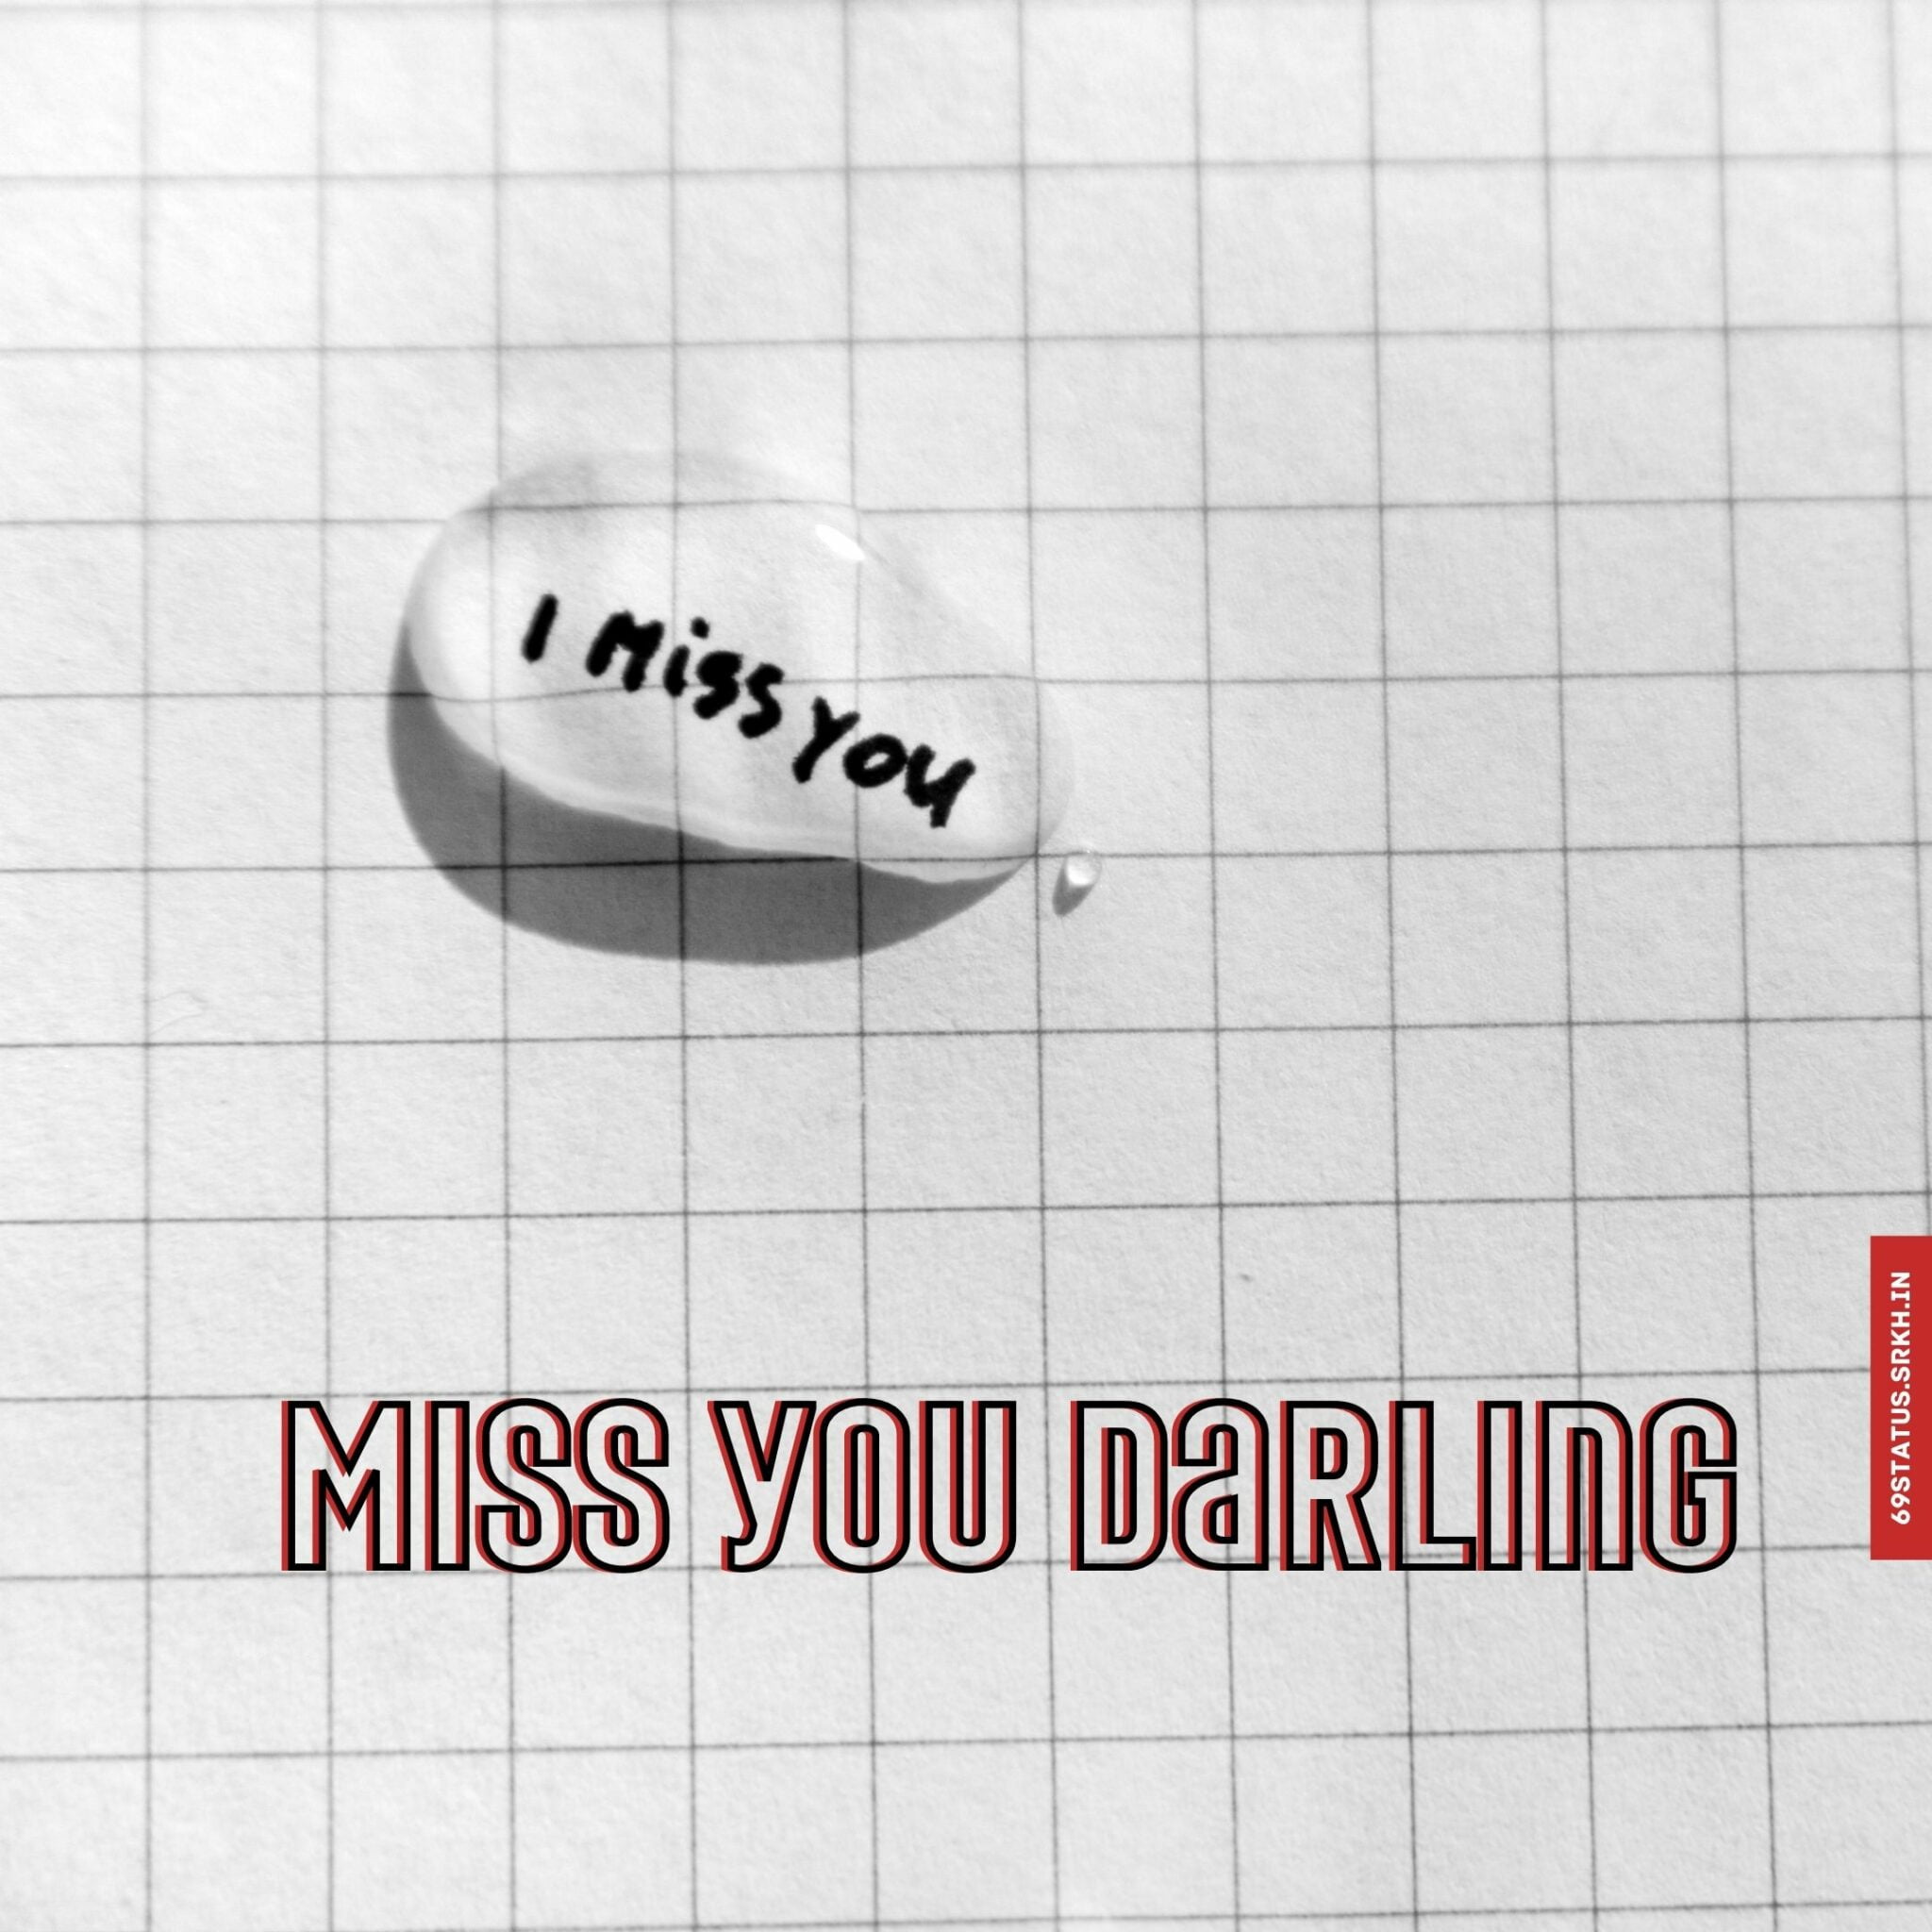 Miss you darling images